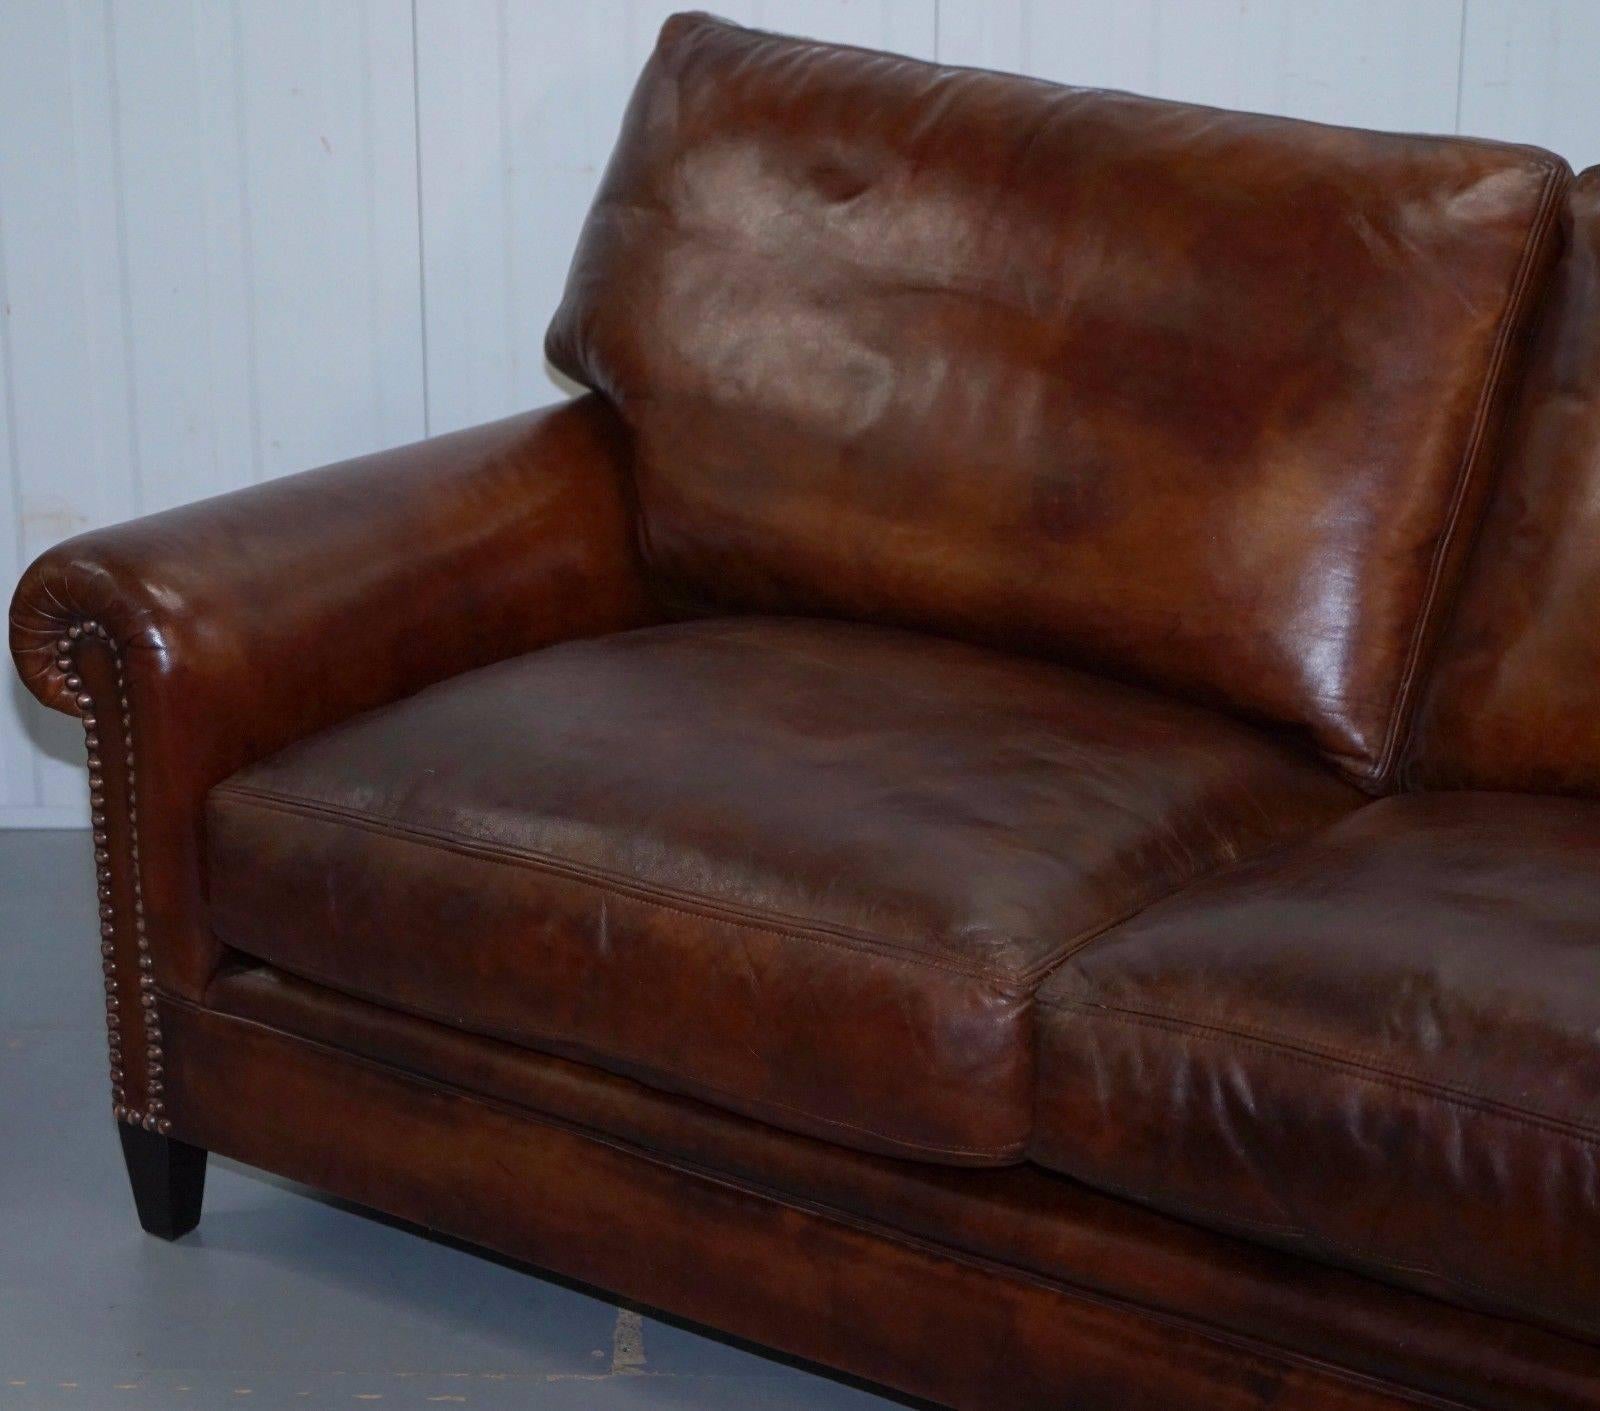 Great Britain (UK) Fully Restored George Smith Aged Whiskey Brown Leather Signature Sofa Feathers